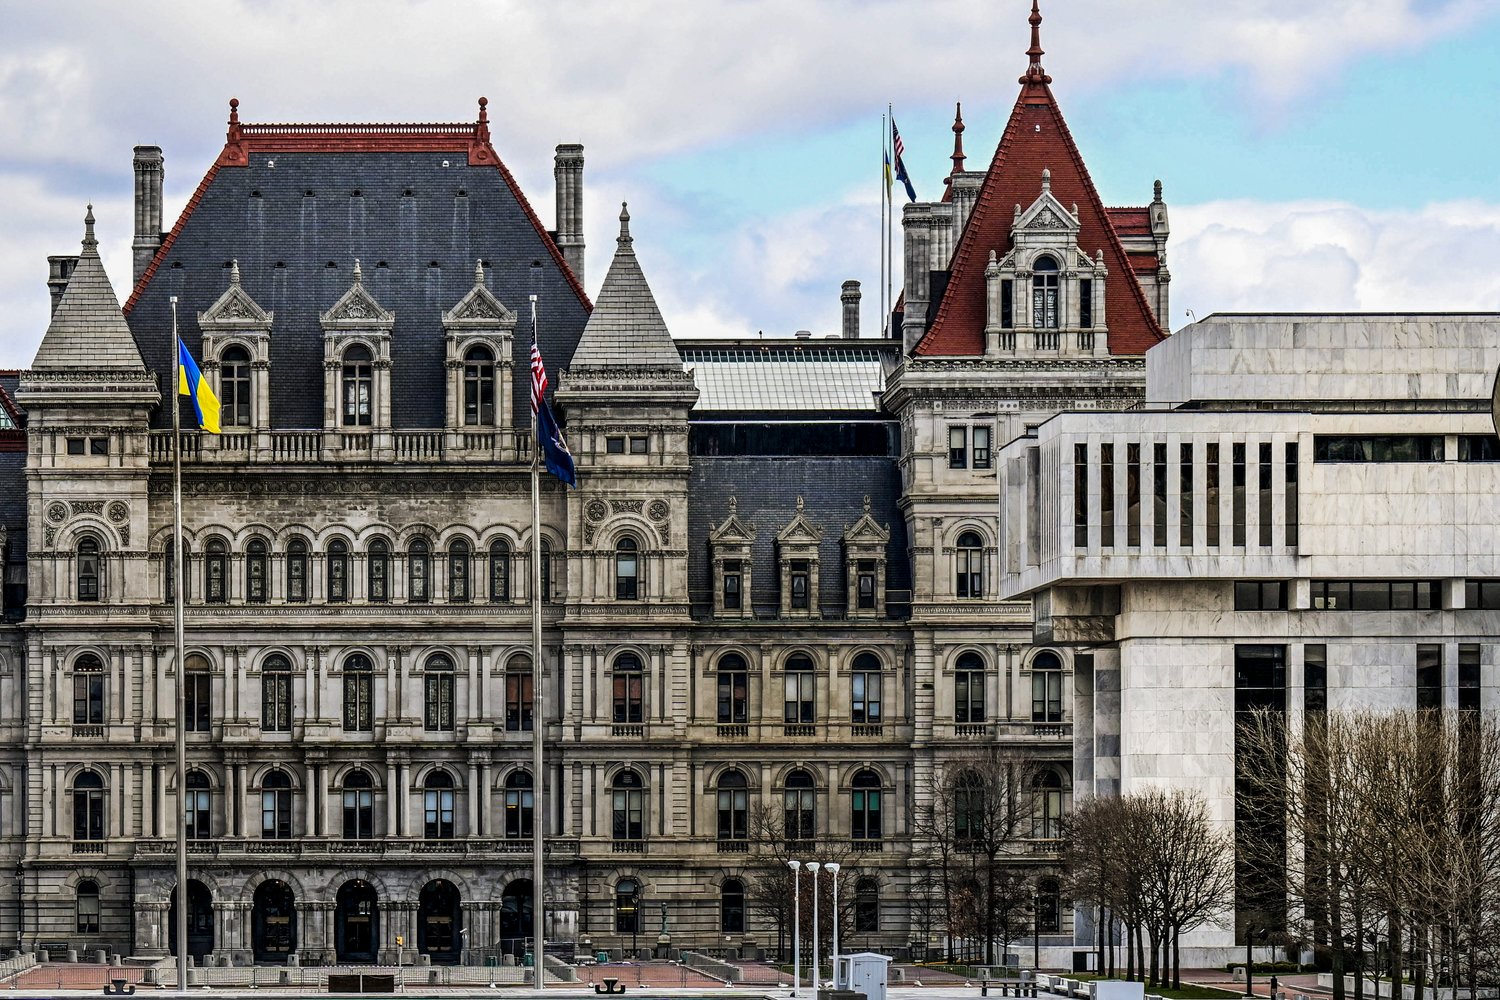 BACK TO THE RE-DRAWING BOARD? — Partial views of the New York state Capitol building, left, is shown next to the state Appellate court building in foreground, right, are shown earlier this month in Albany. The state’s top court has determined that state Democrats engaged in gerrymandering when drawing new congressional district boundaries for the next decade. The judges in Wednesday’s ruling said a special court master will pass new district maps instead of the Legislature.